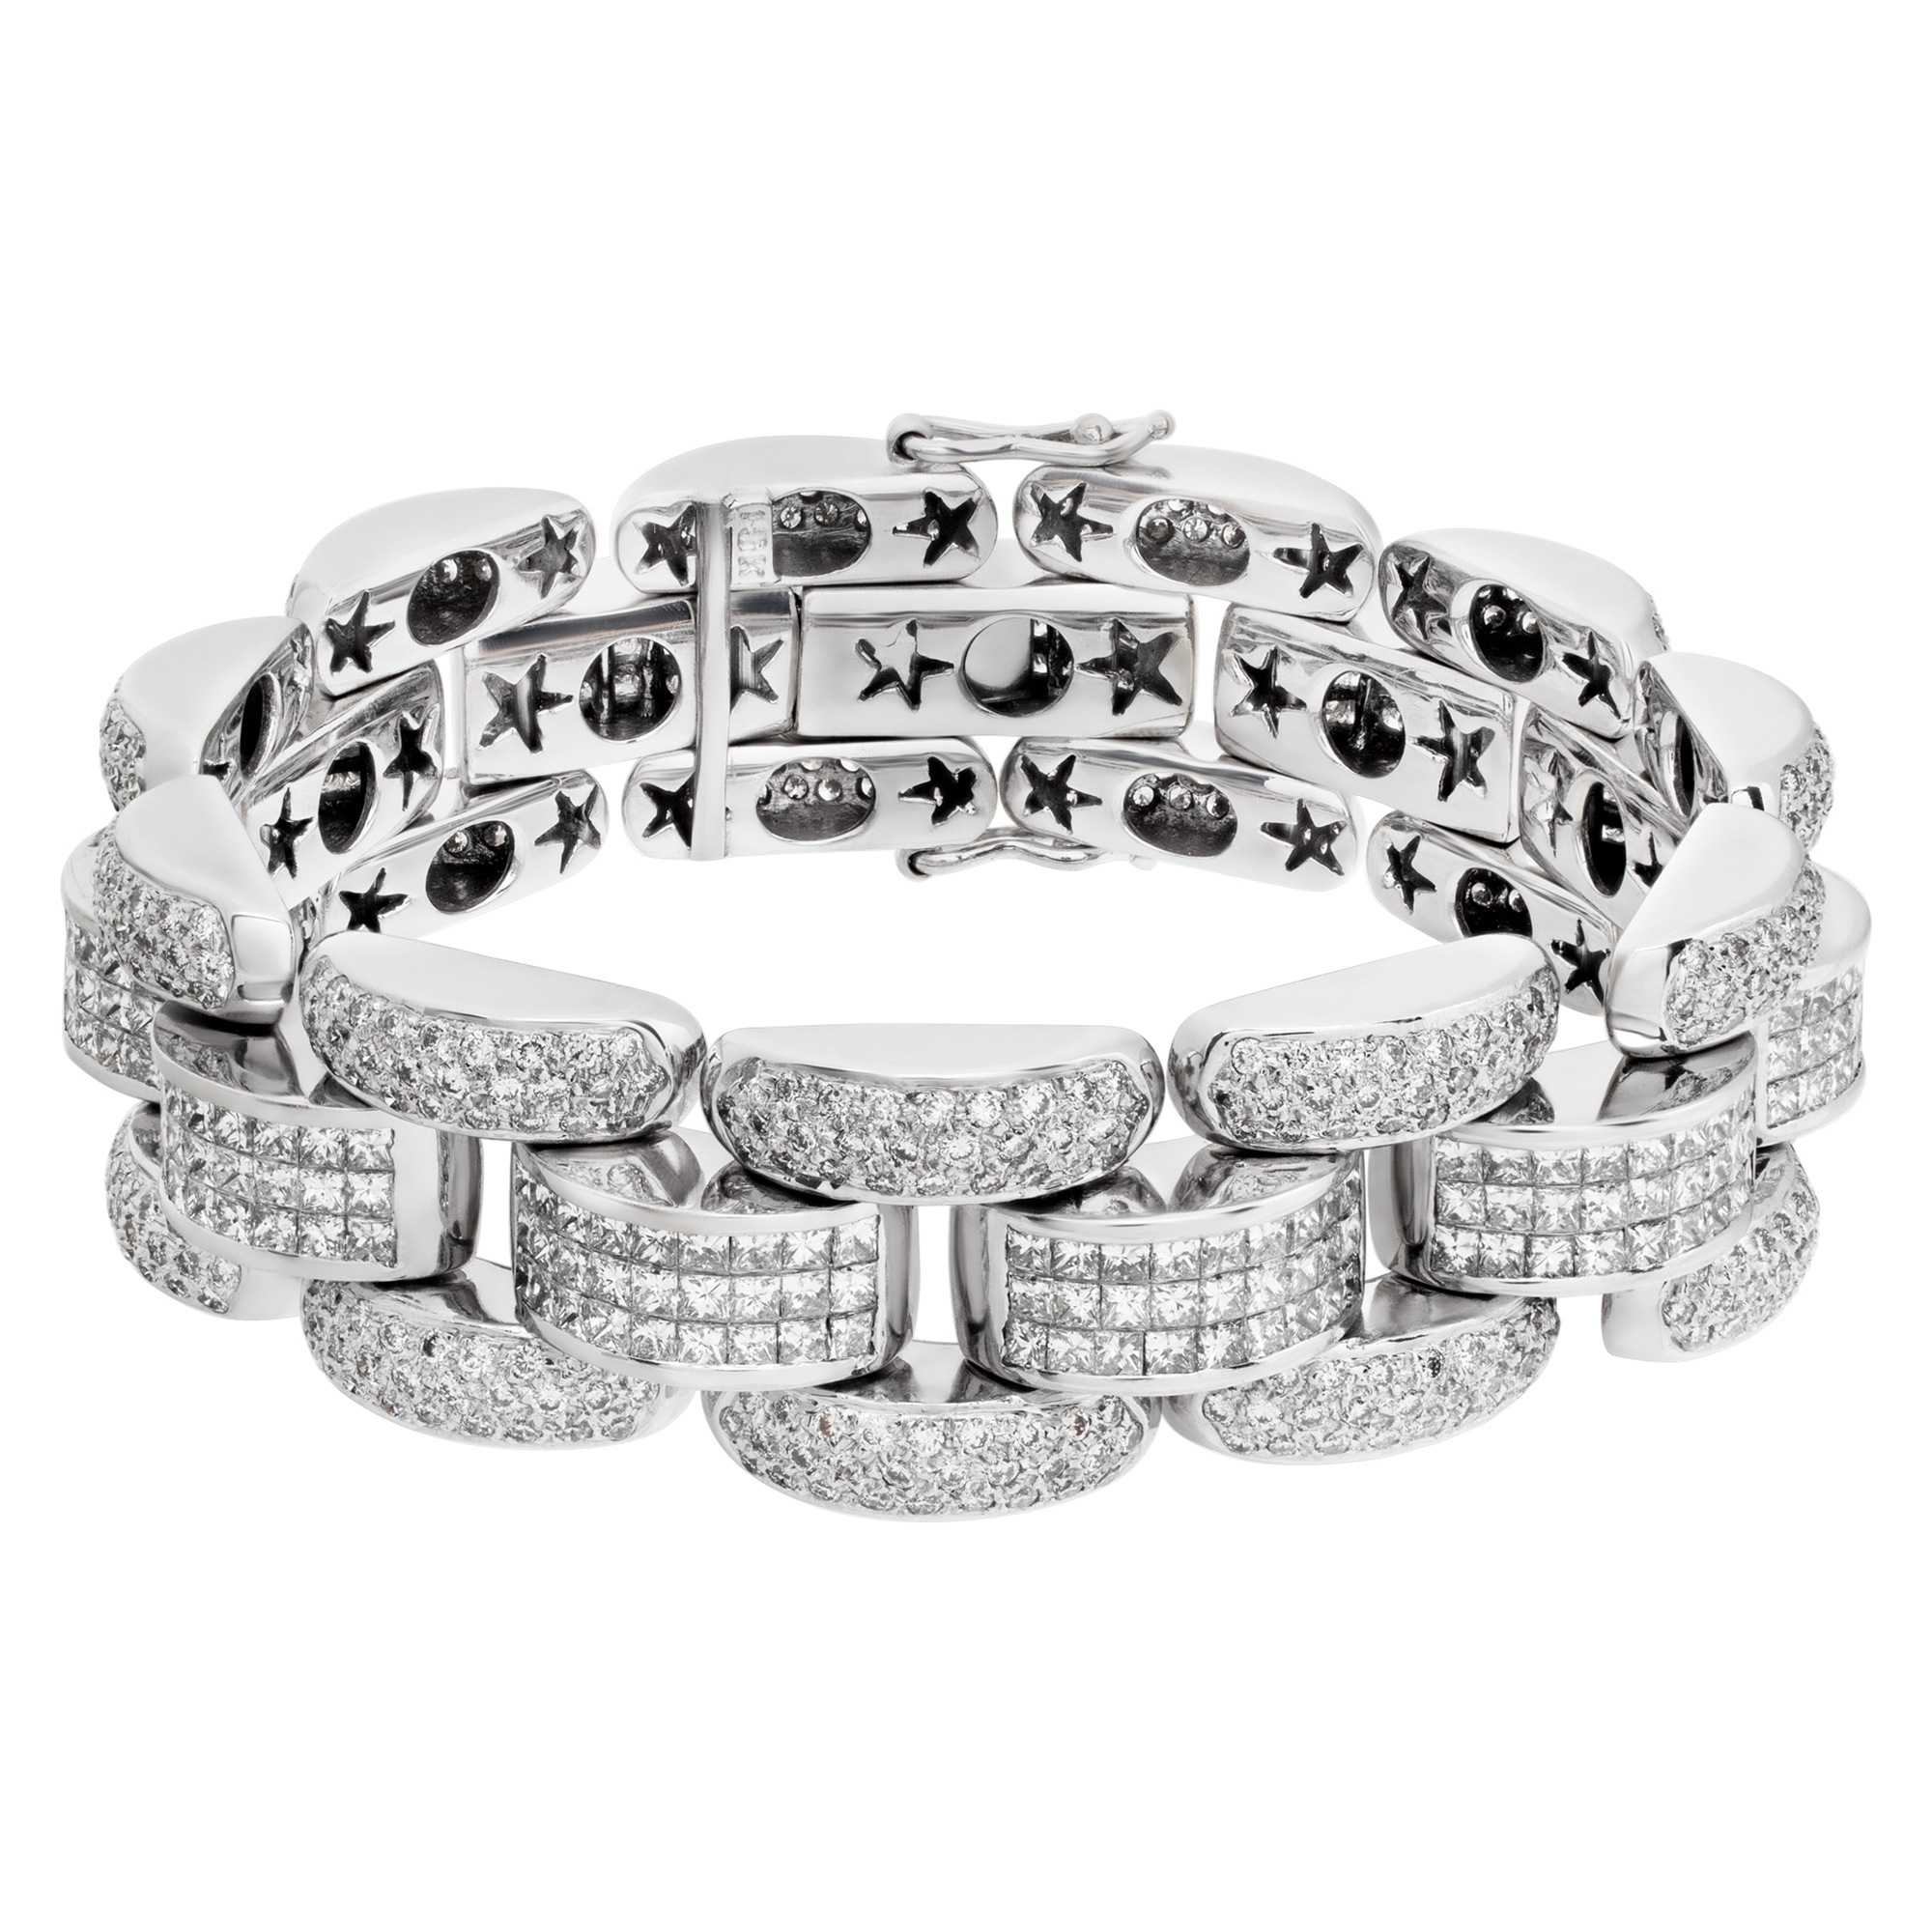 Link bracelet with invisibly set princess and round cut diamonds in 18k white gold